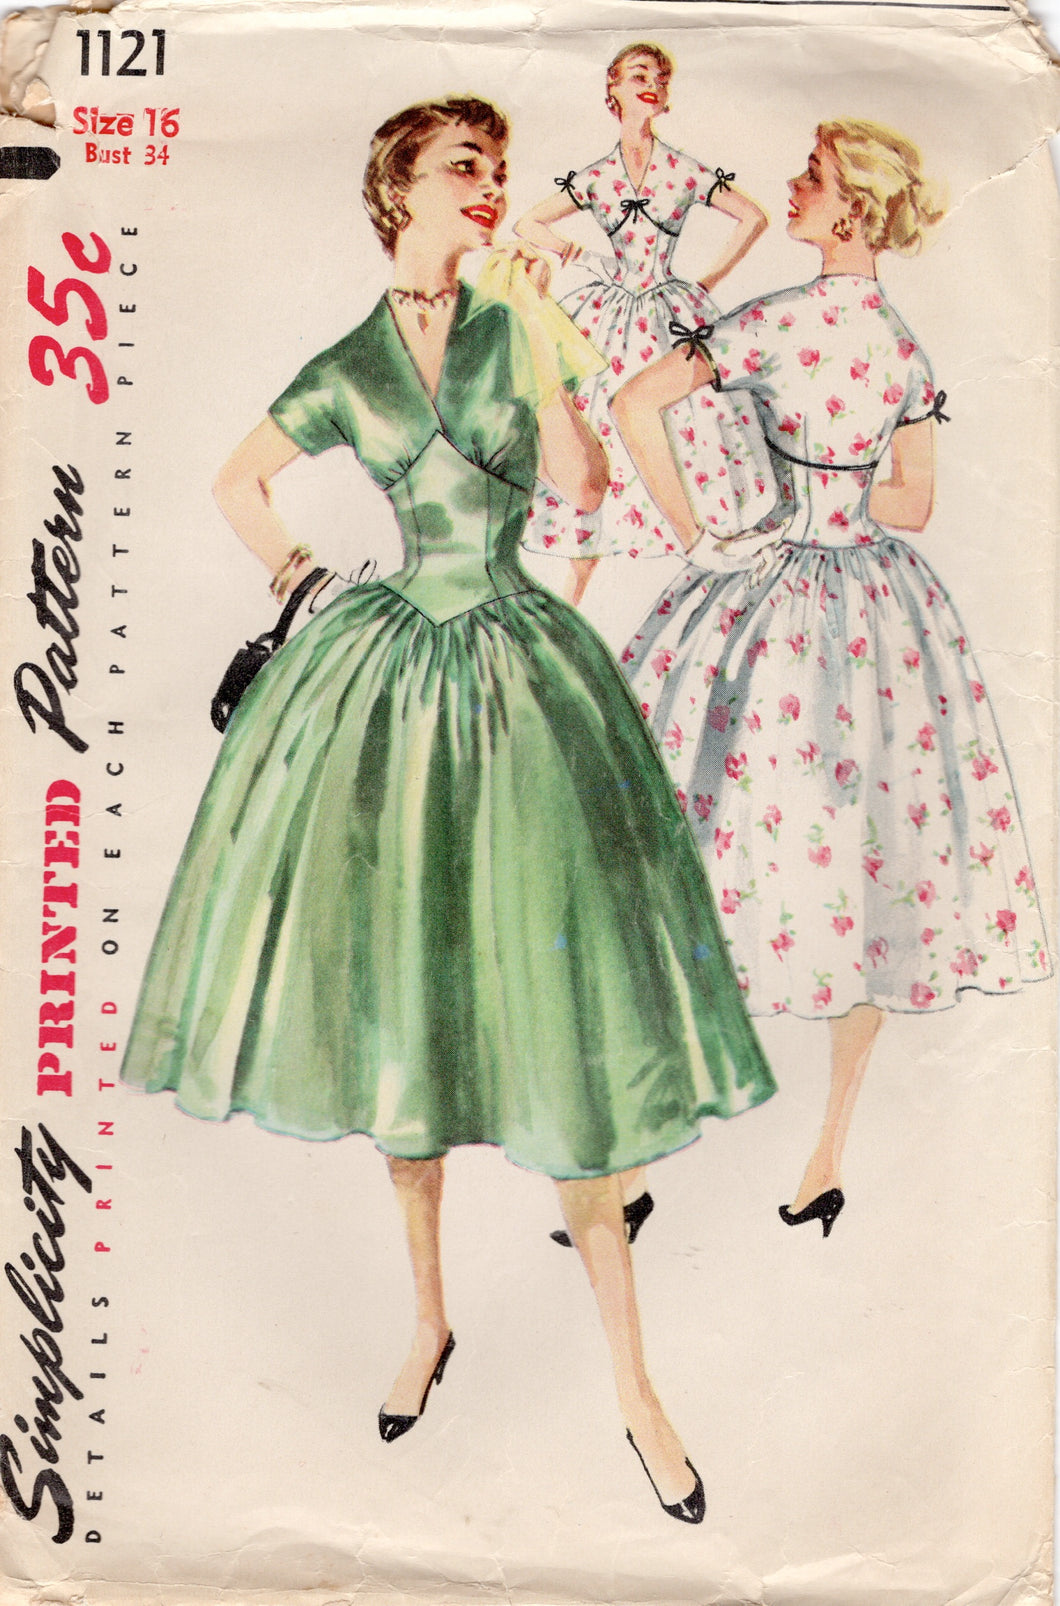 1950's Simplicity Fitted Waist Dress Pattern with V Neck and Gathered Skirt - Bust 34